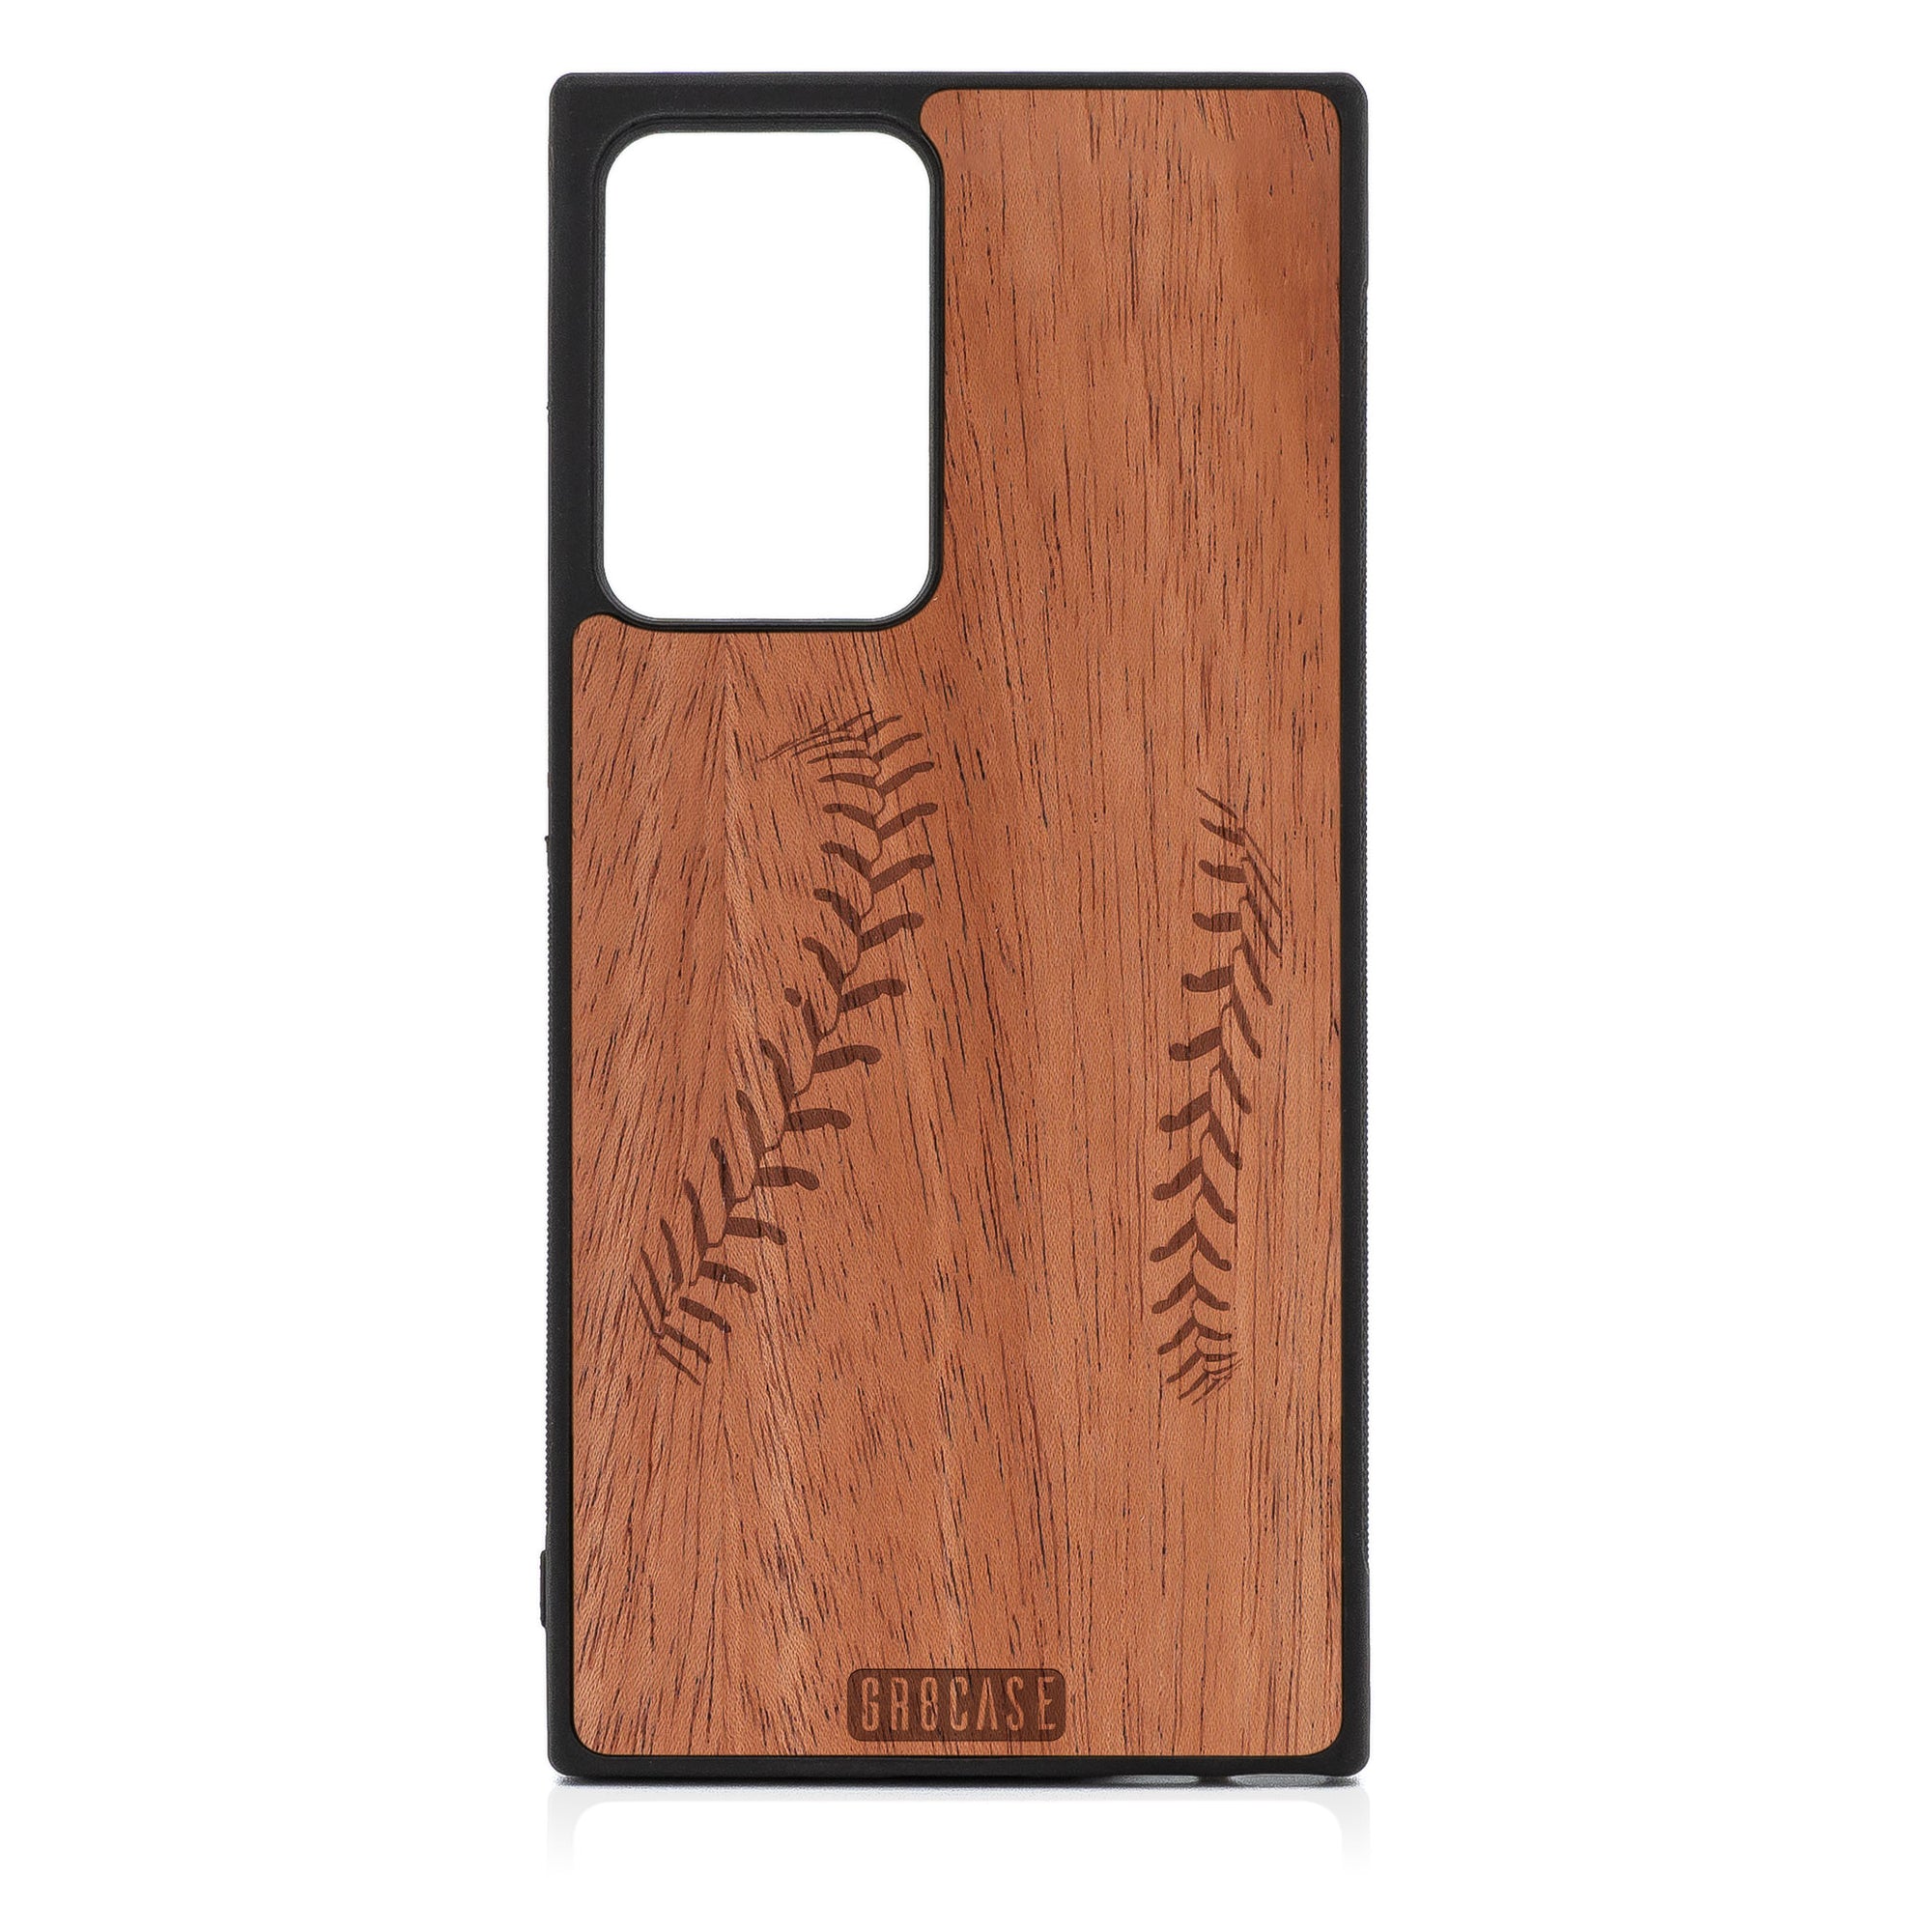 Baseball Stitches Design Wood Case For Note Samsung Galaxy Note 20 Ultra